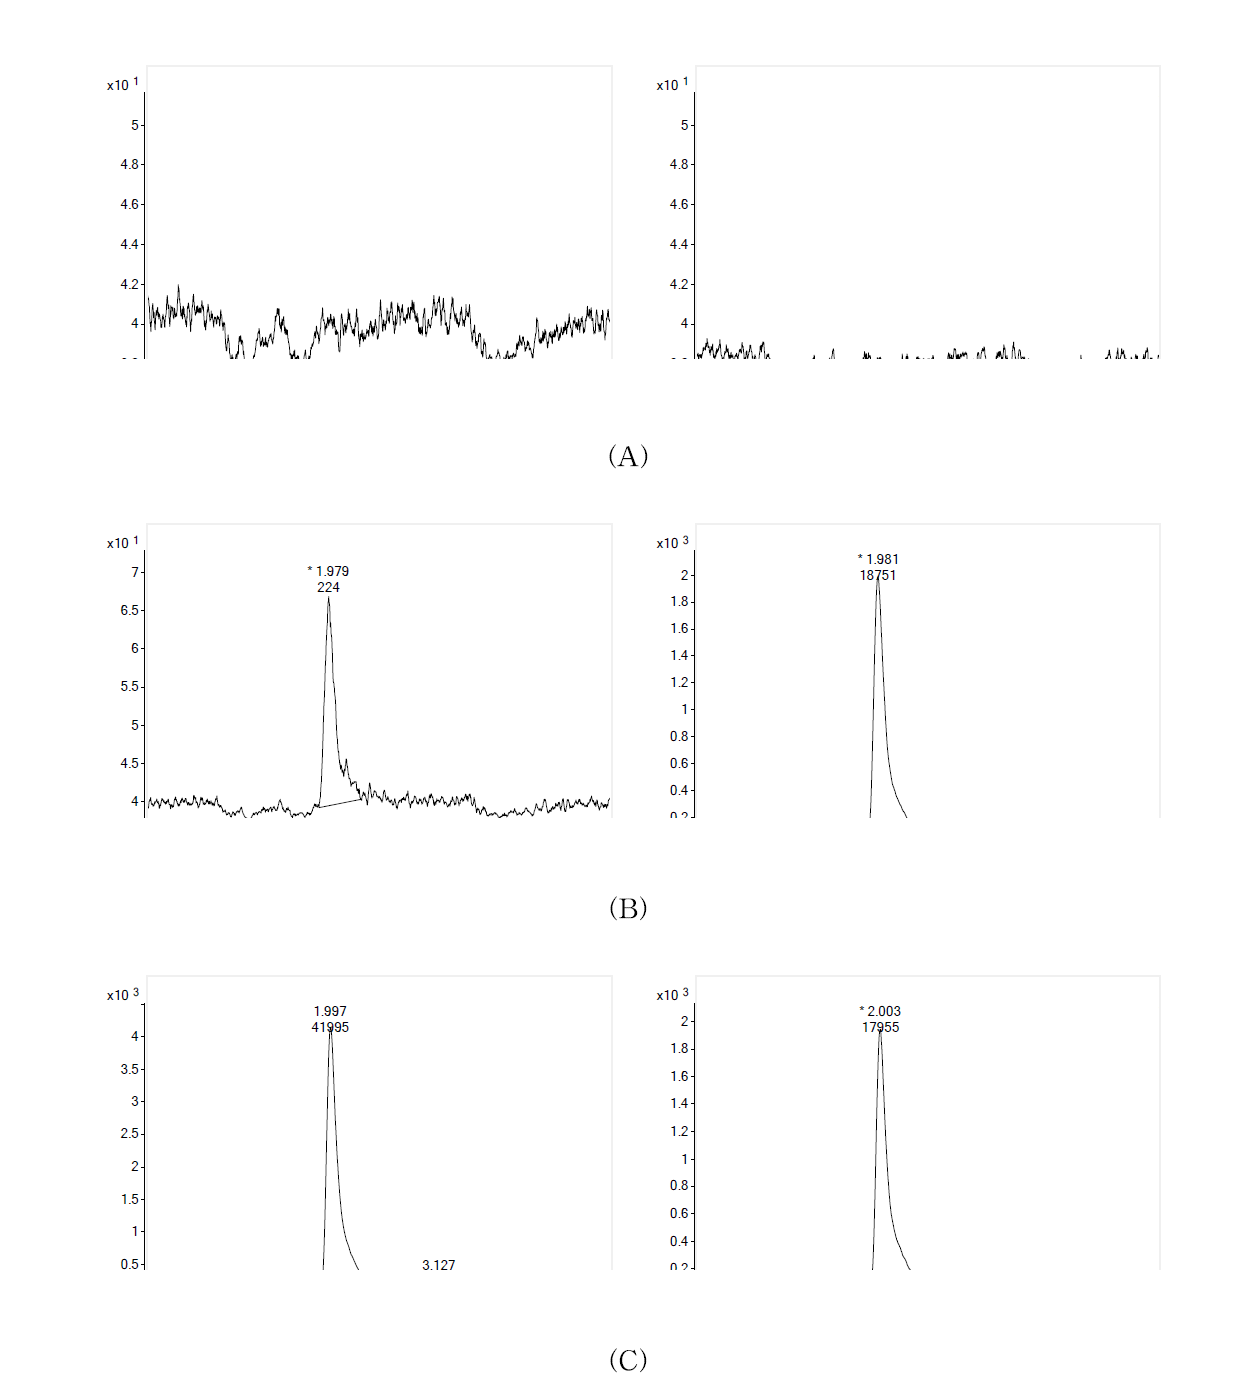 MRM chromatograms of methenamine (left) and I.S. (right) obtained from (A) blank rat plasma, (B) LLOQ concentration (5 ng/mL) of methenamine in plasma spiked with methenamine and I.S. and (C) ULOQ concentration (1000 ng/mL) of methenamine in plasma spiked with methenamine and I.S